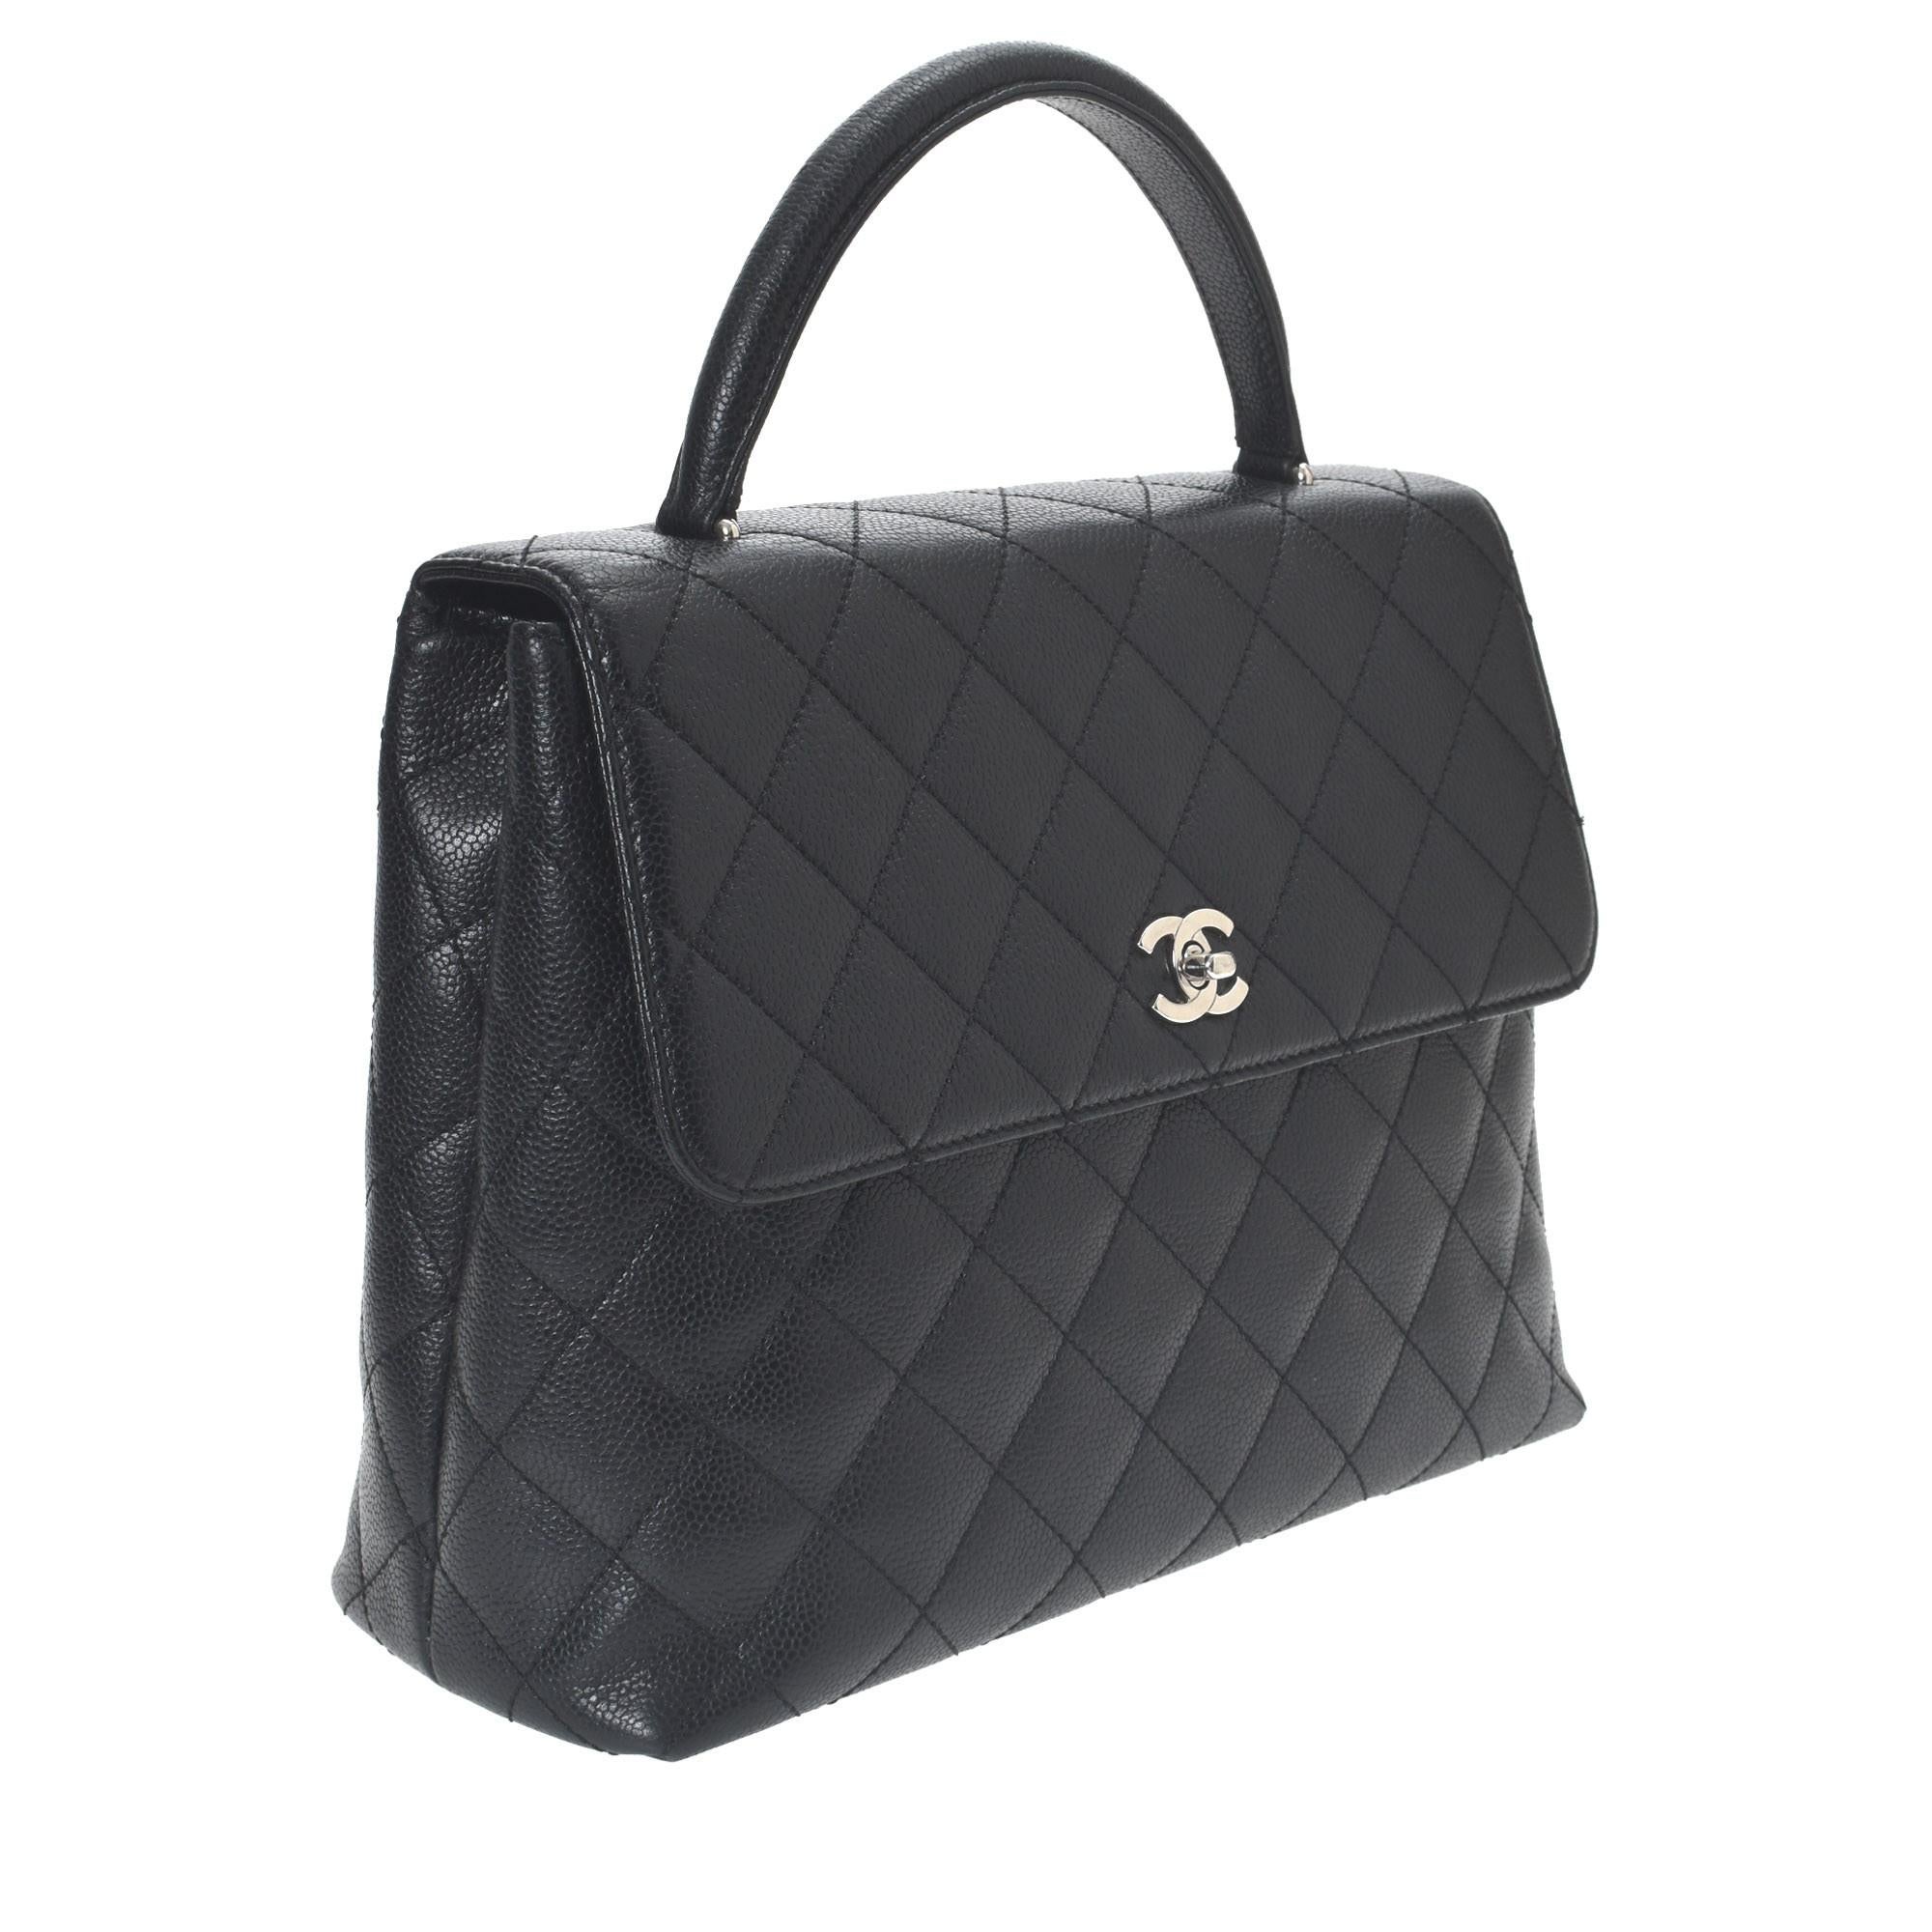 Chanel Kelly Bag In Excellent Condition For Sale In Montreal, QC